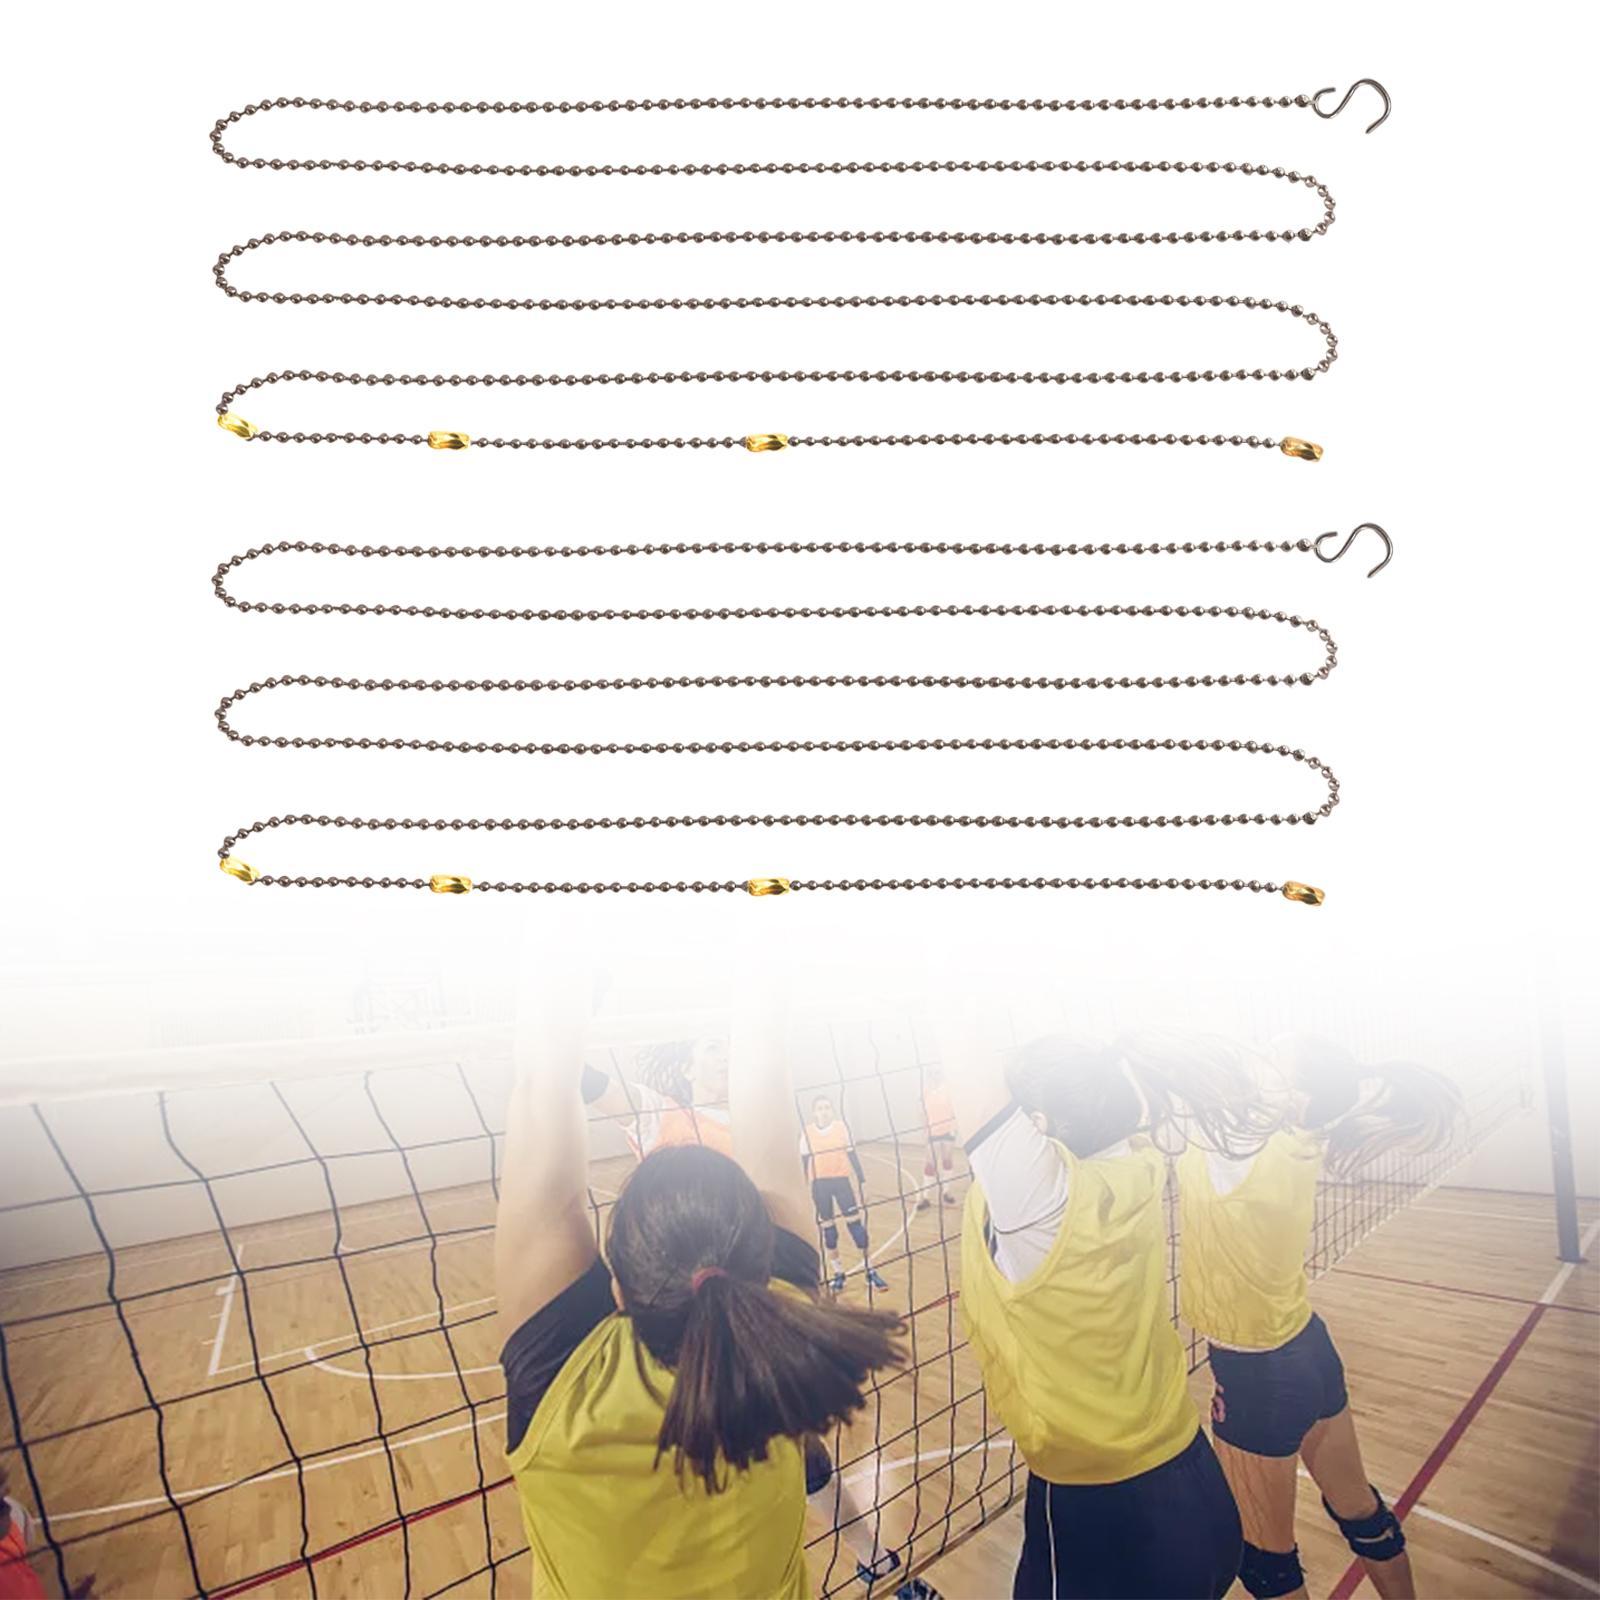 2.5M Length Volleyball Net Measure Chain for Outdoor Training Competitions